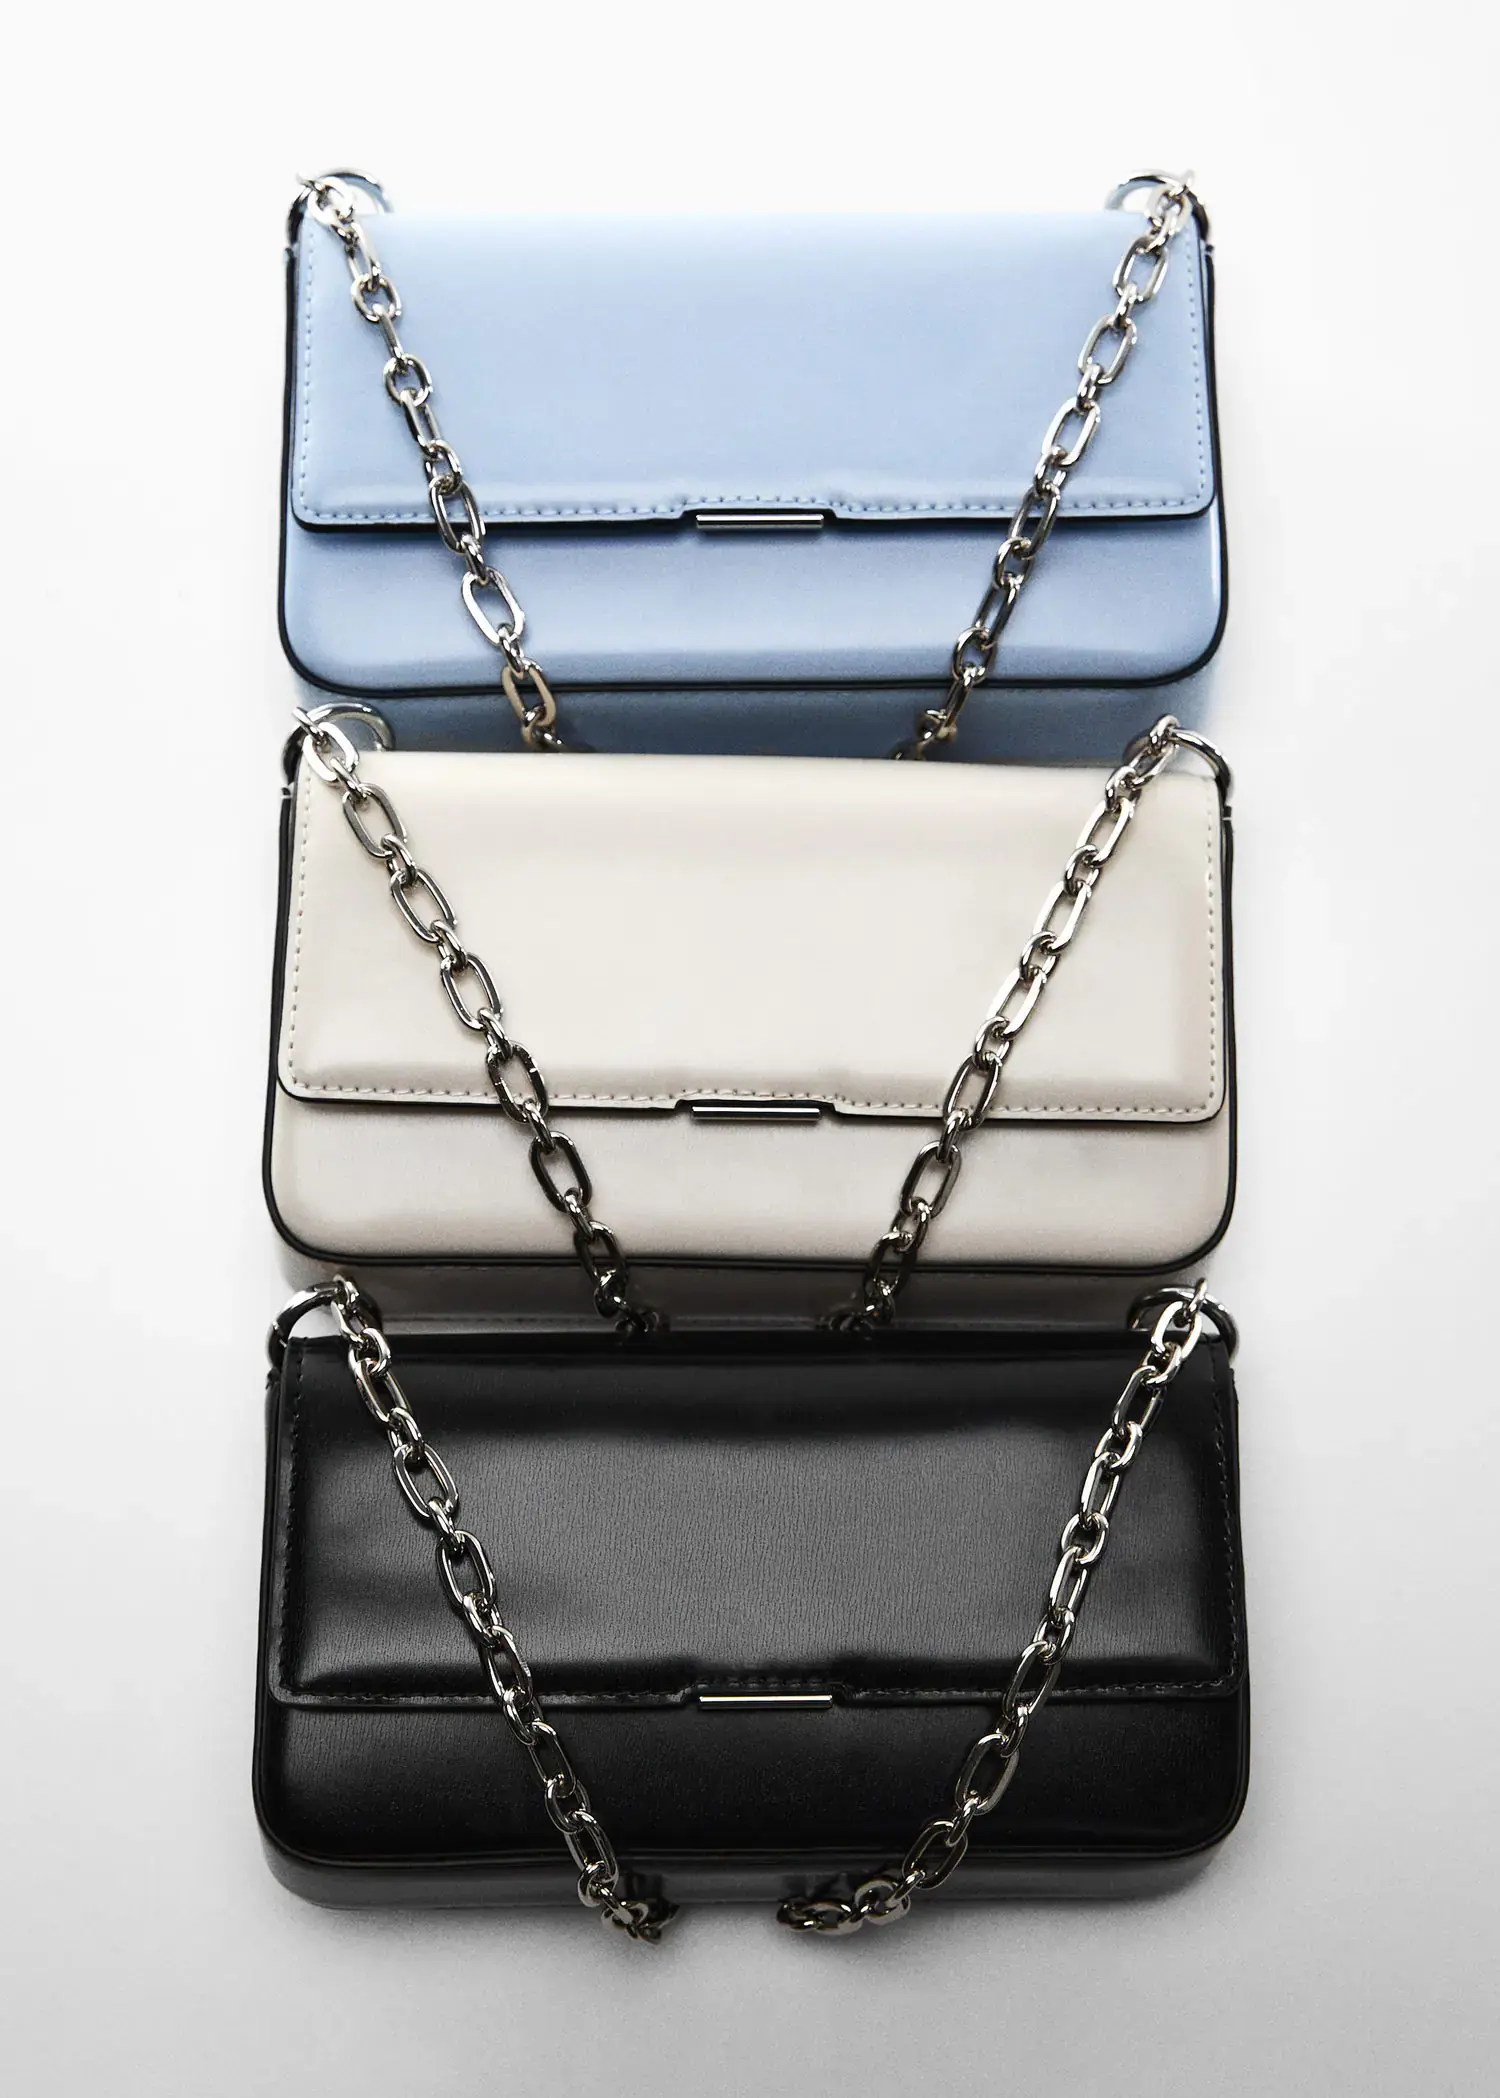 Mango Flap chain bag. a group of three purses sitting next to each other on a table. 